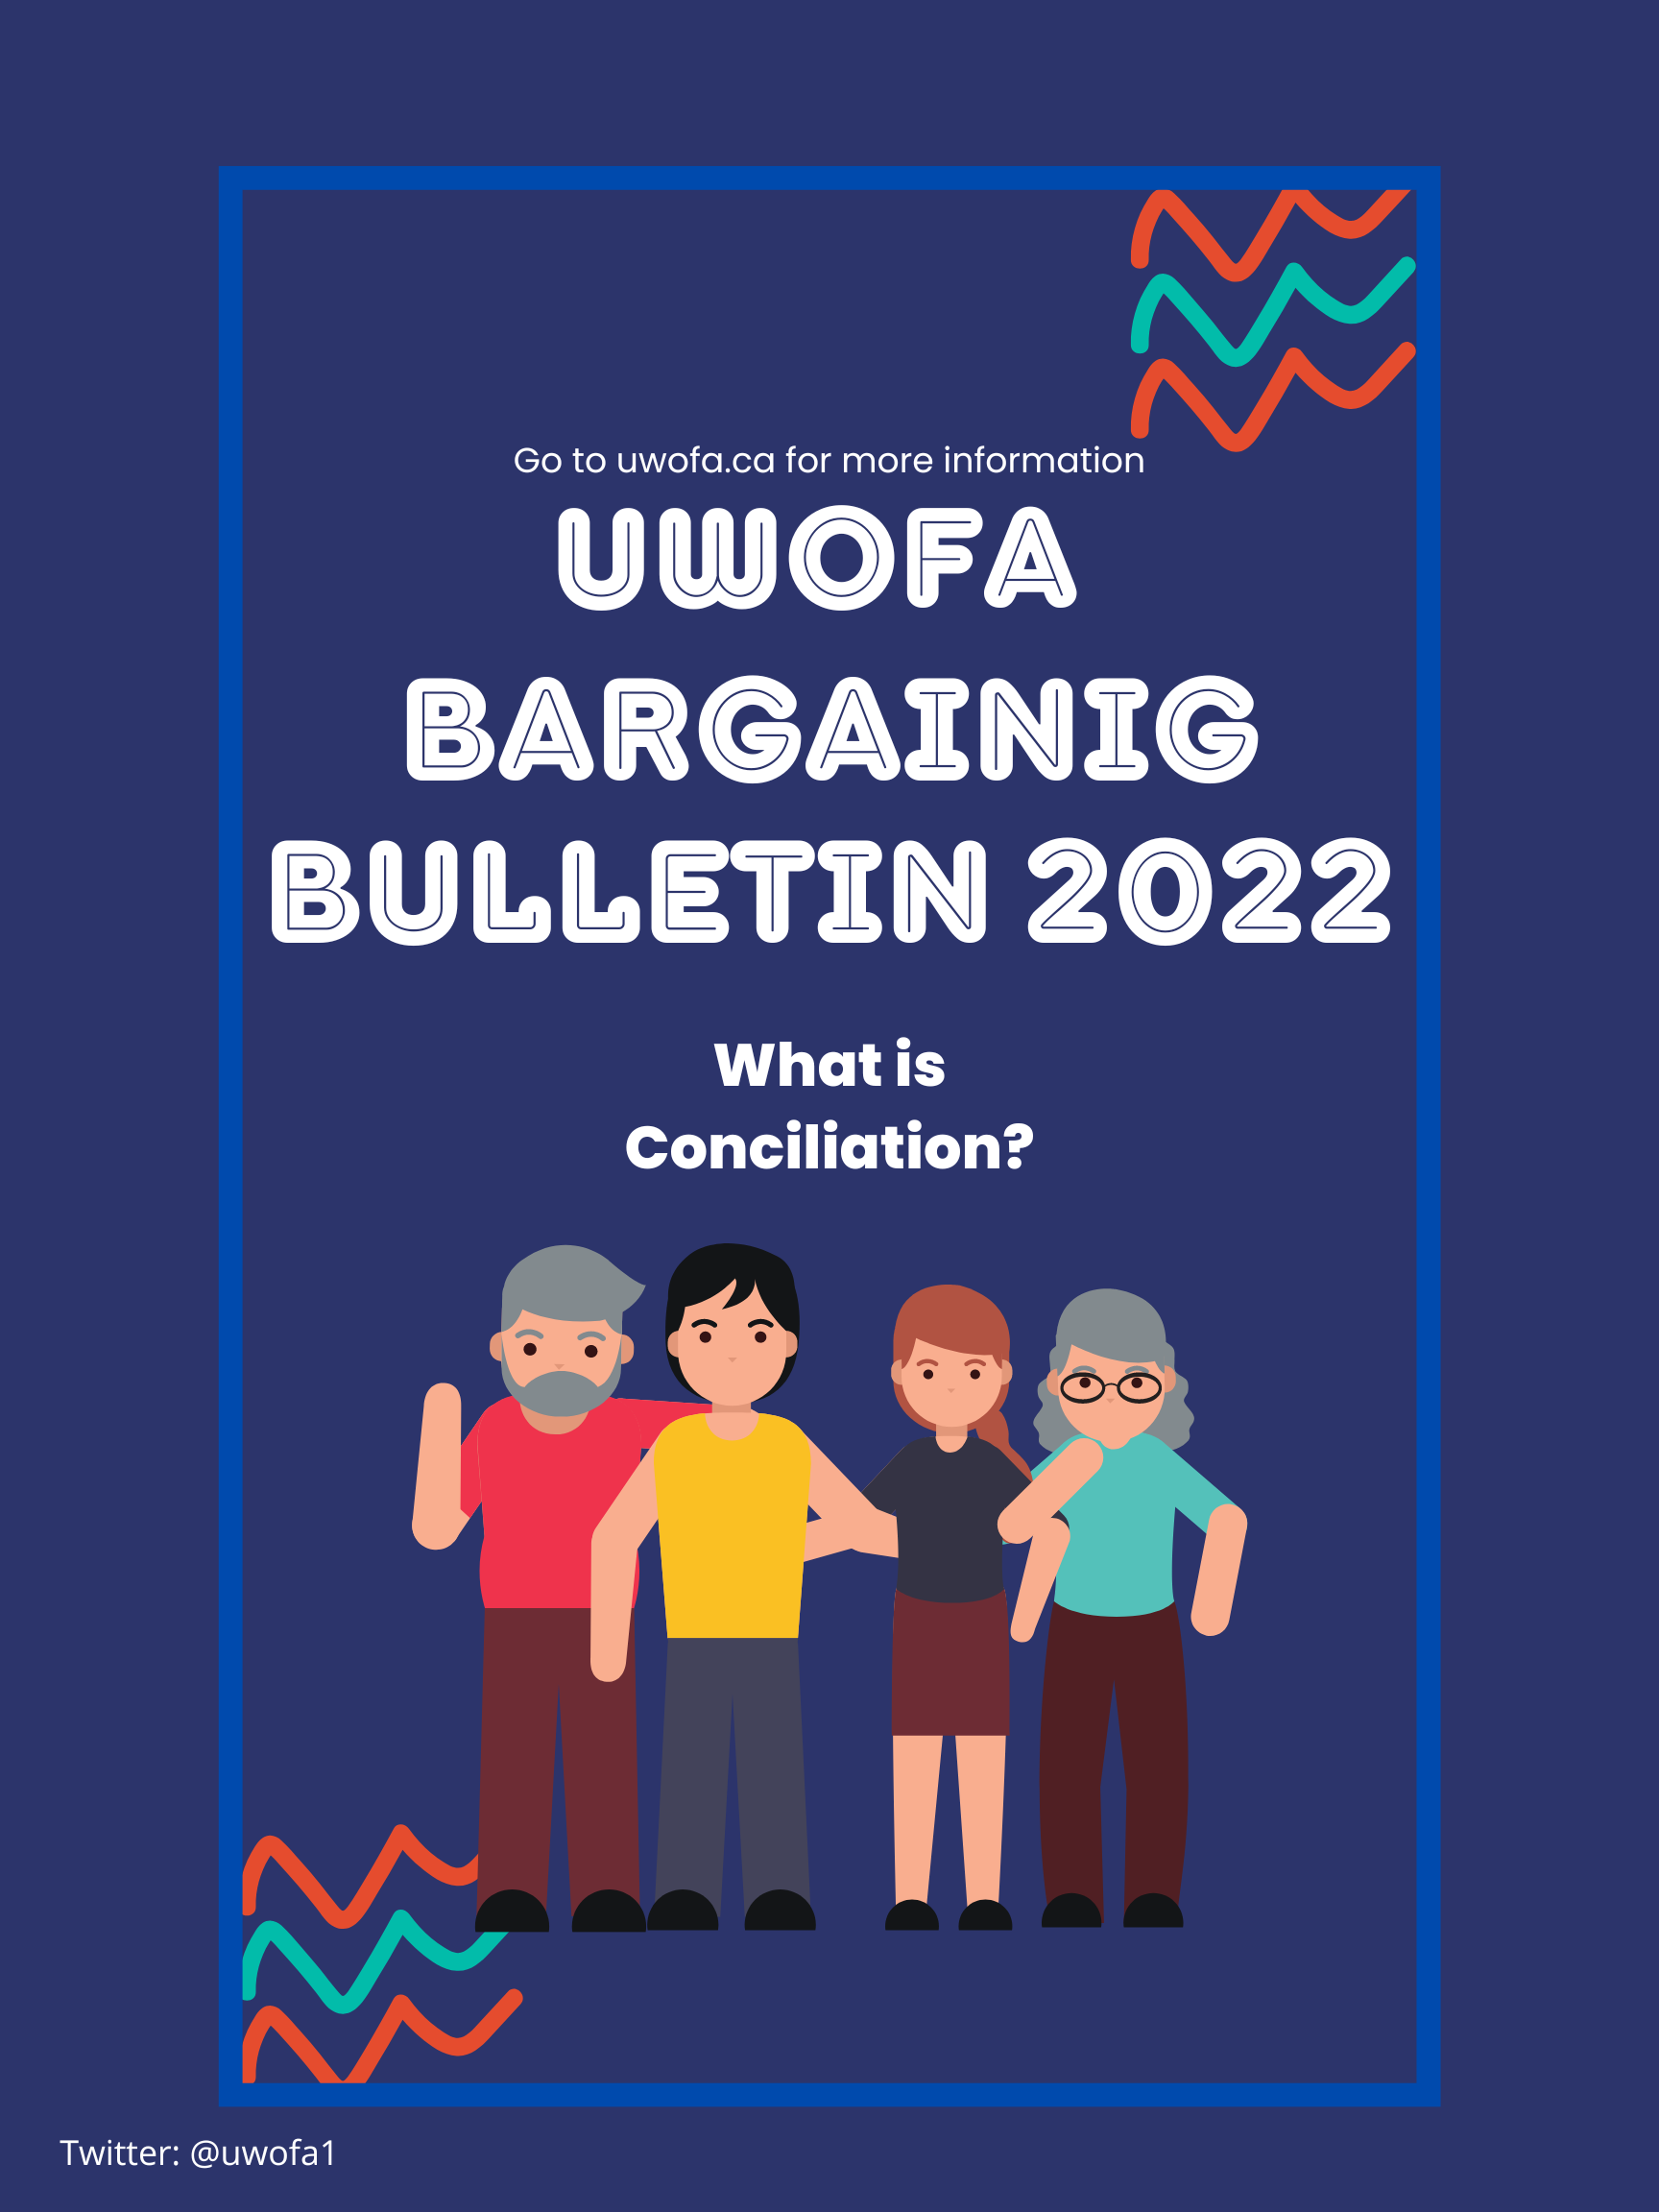 Text: Go to uwofa.ca for more information, UWOFA Bargaining Bulletin 2022, What is Conciliation? Twitter: @uwofa1, IMAGE: 4 animated people joining hands